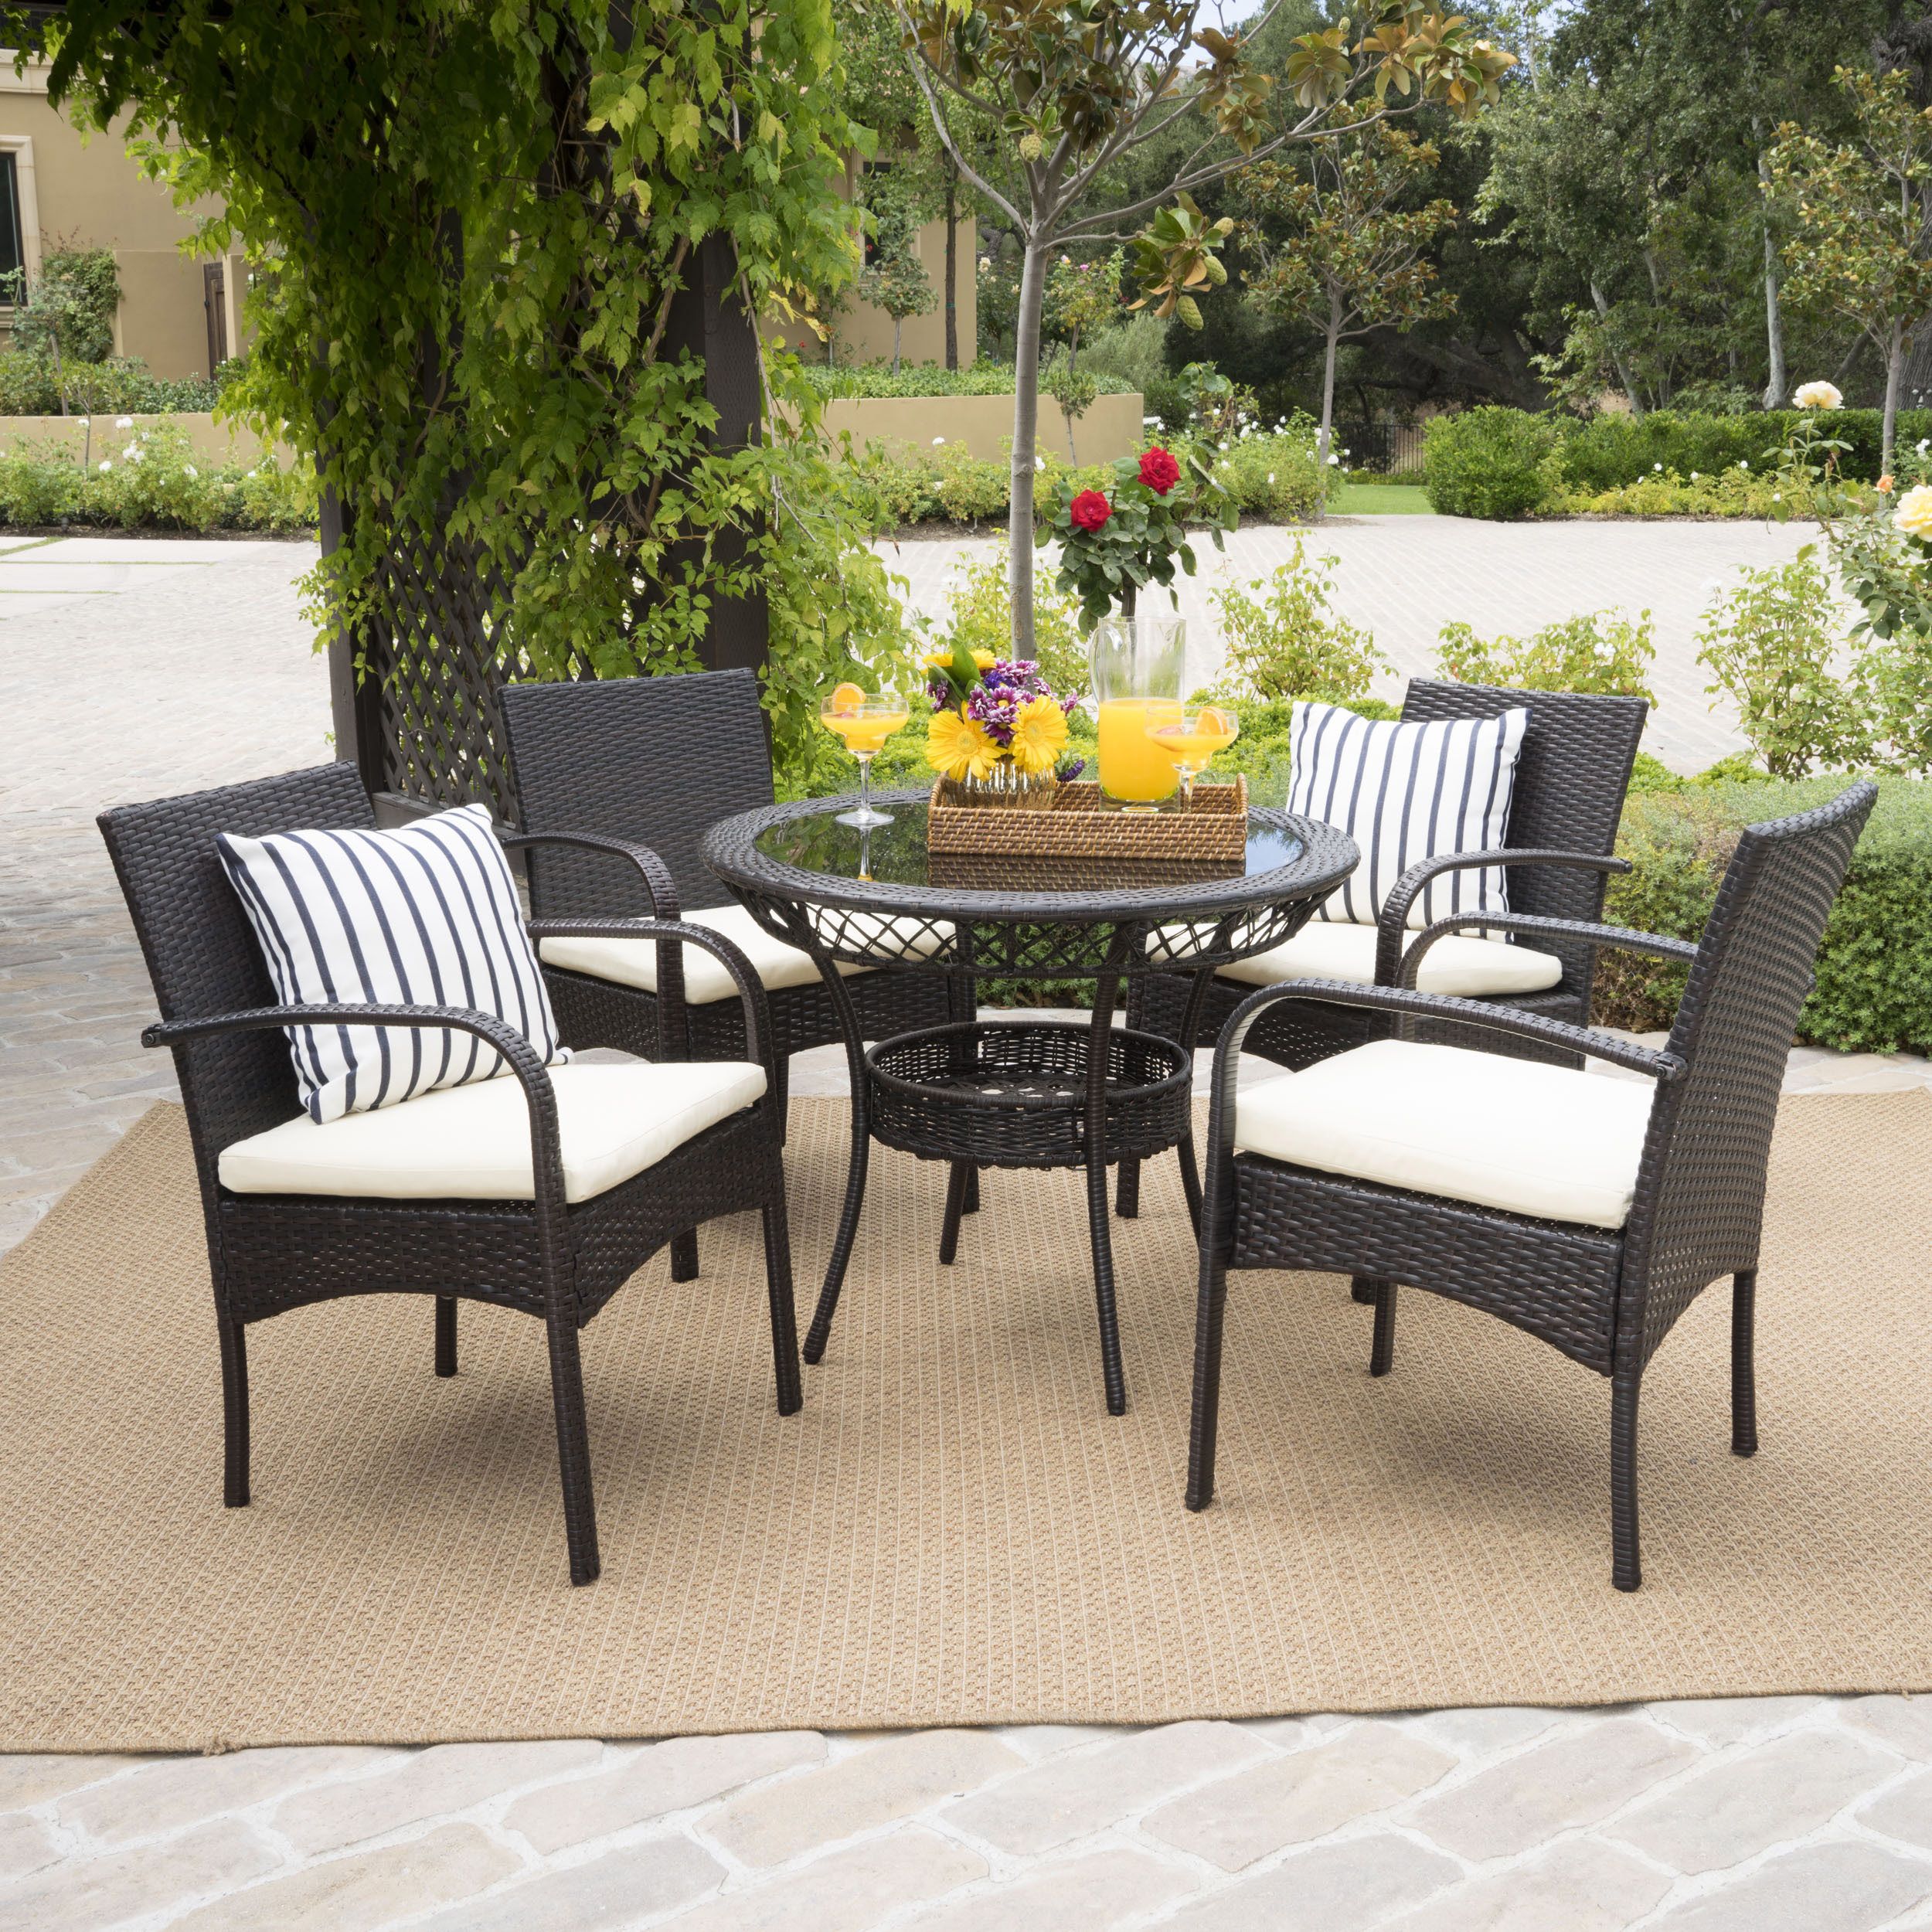 Venetian 5 Piece Outdoor Round Glass Top Wicker Dining Set With For 5 Piece Round Patio Dining Sets (View 7 of 15)